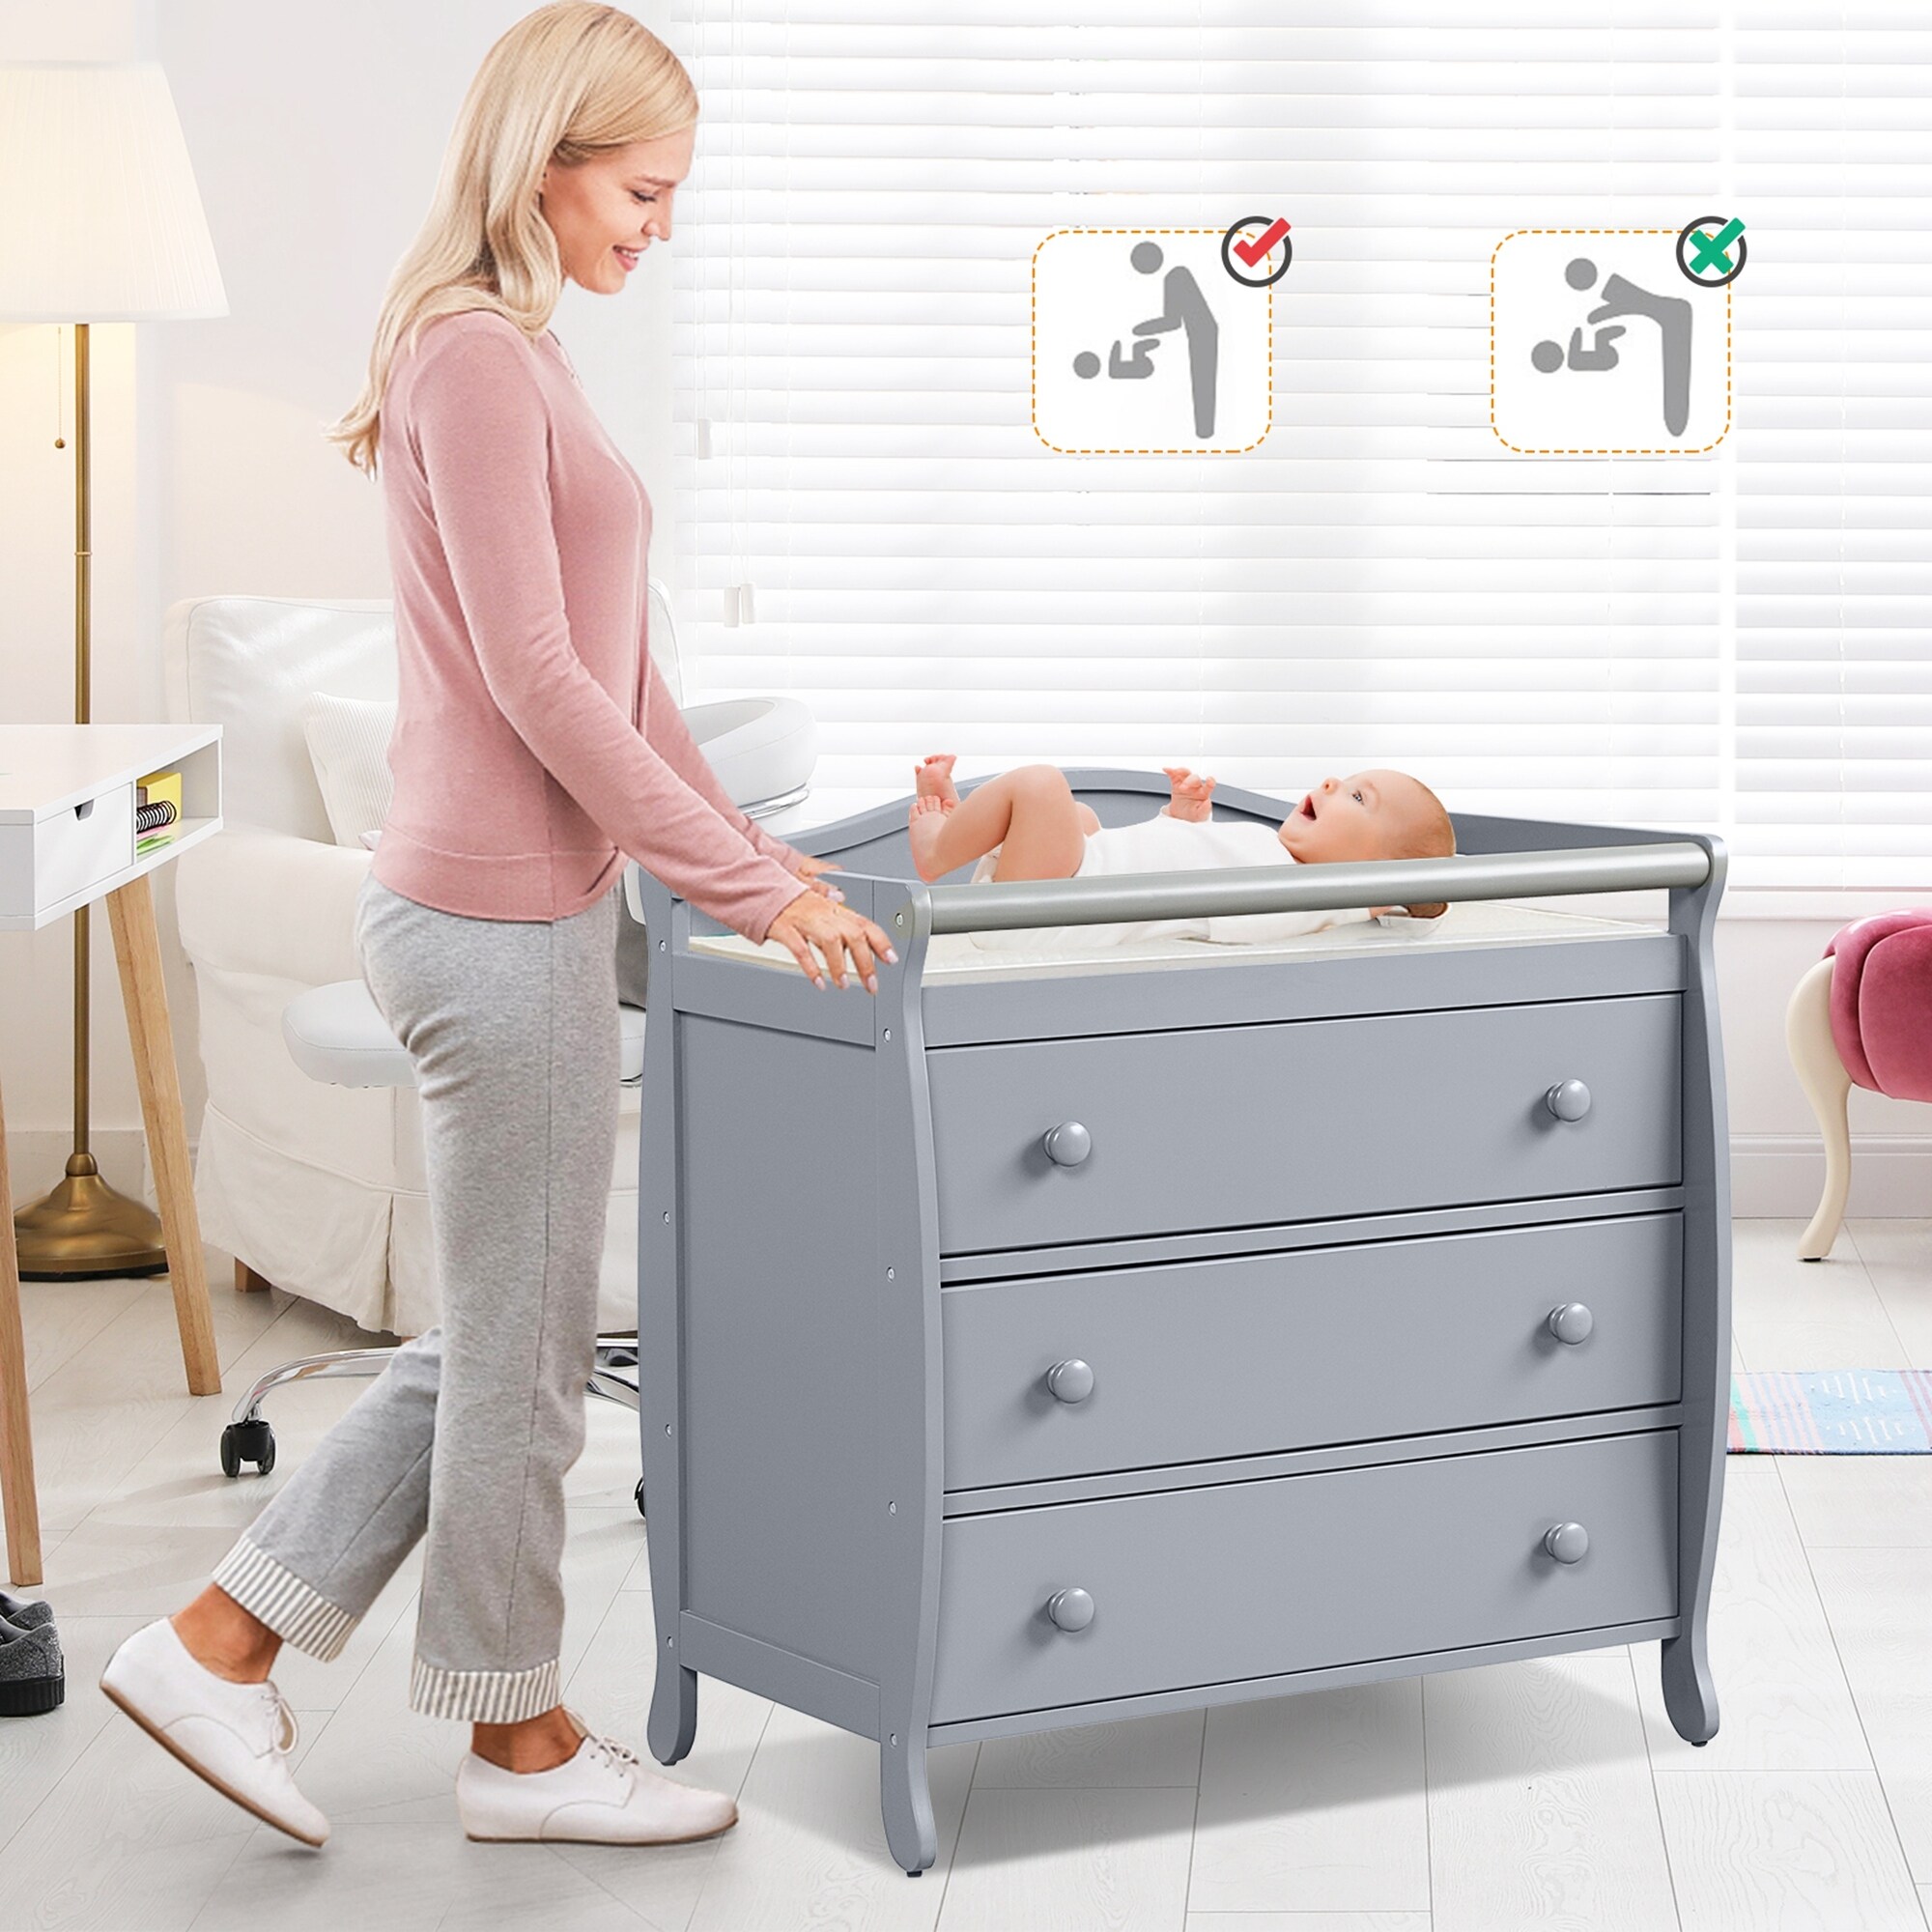 https://ak1.ostkcdn.com/images/products/is/images/direct/a2207692bf9c1f82b63f03bcdd52ac9dac813237/Costway-3-Drawer-Baby-Changing-Table-Infant-Diaper-Changing-Station-w-.jpg